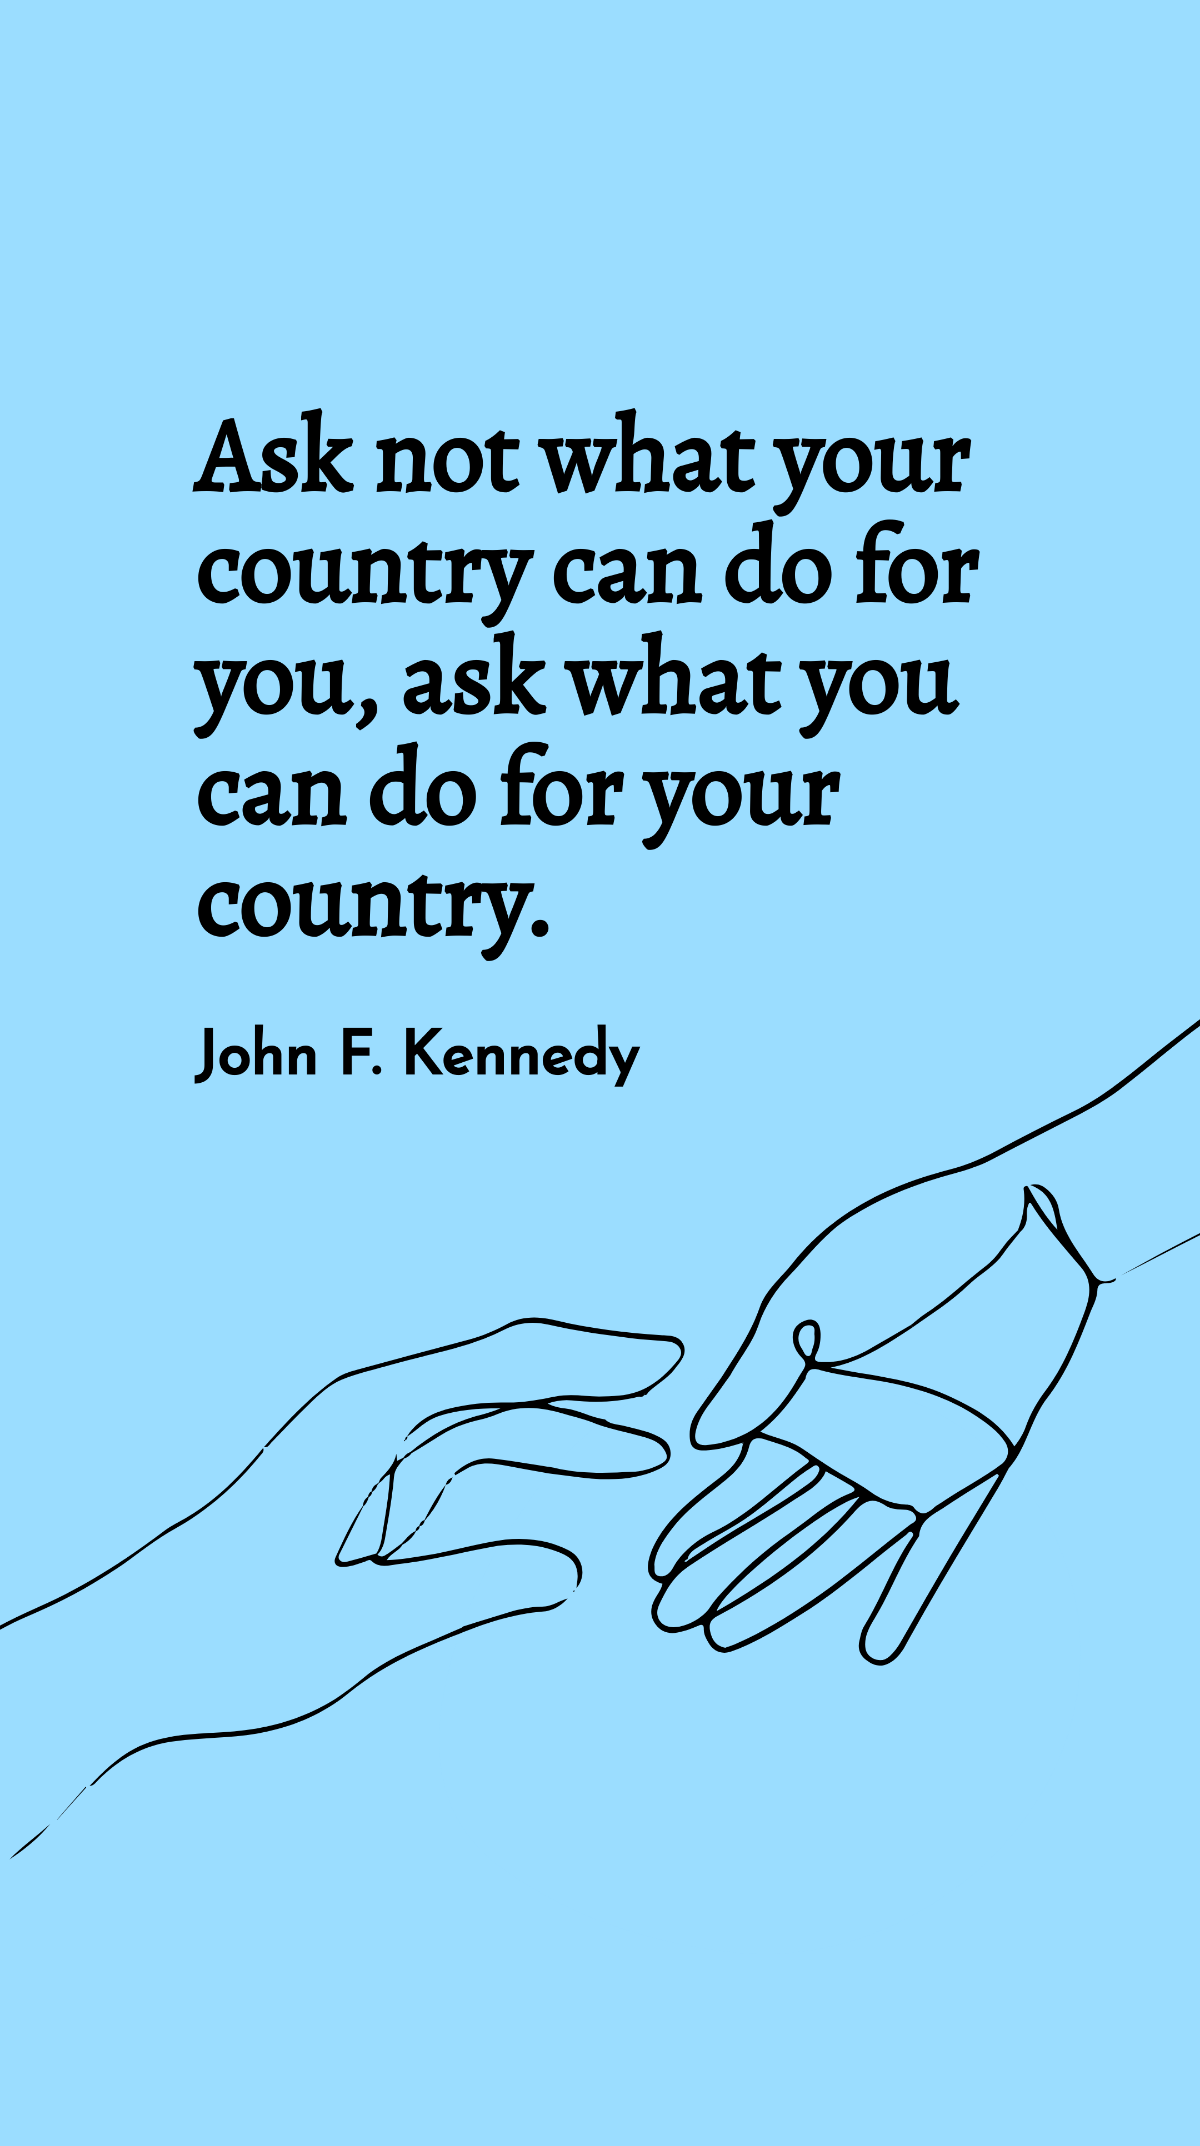 John F. Kennedy - Ask not what your country can do for you, ask what you can do for your country.